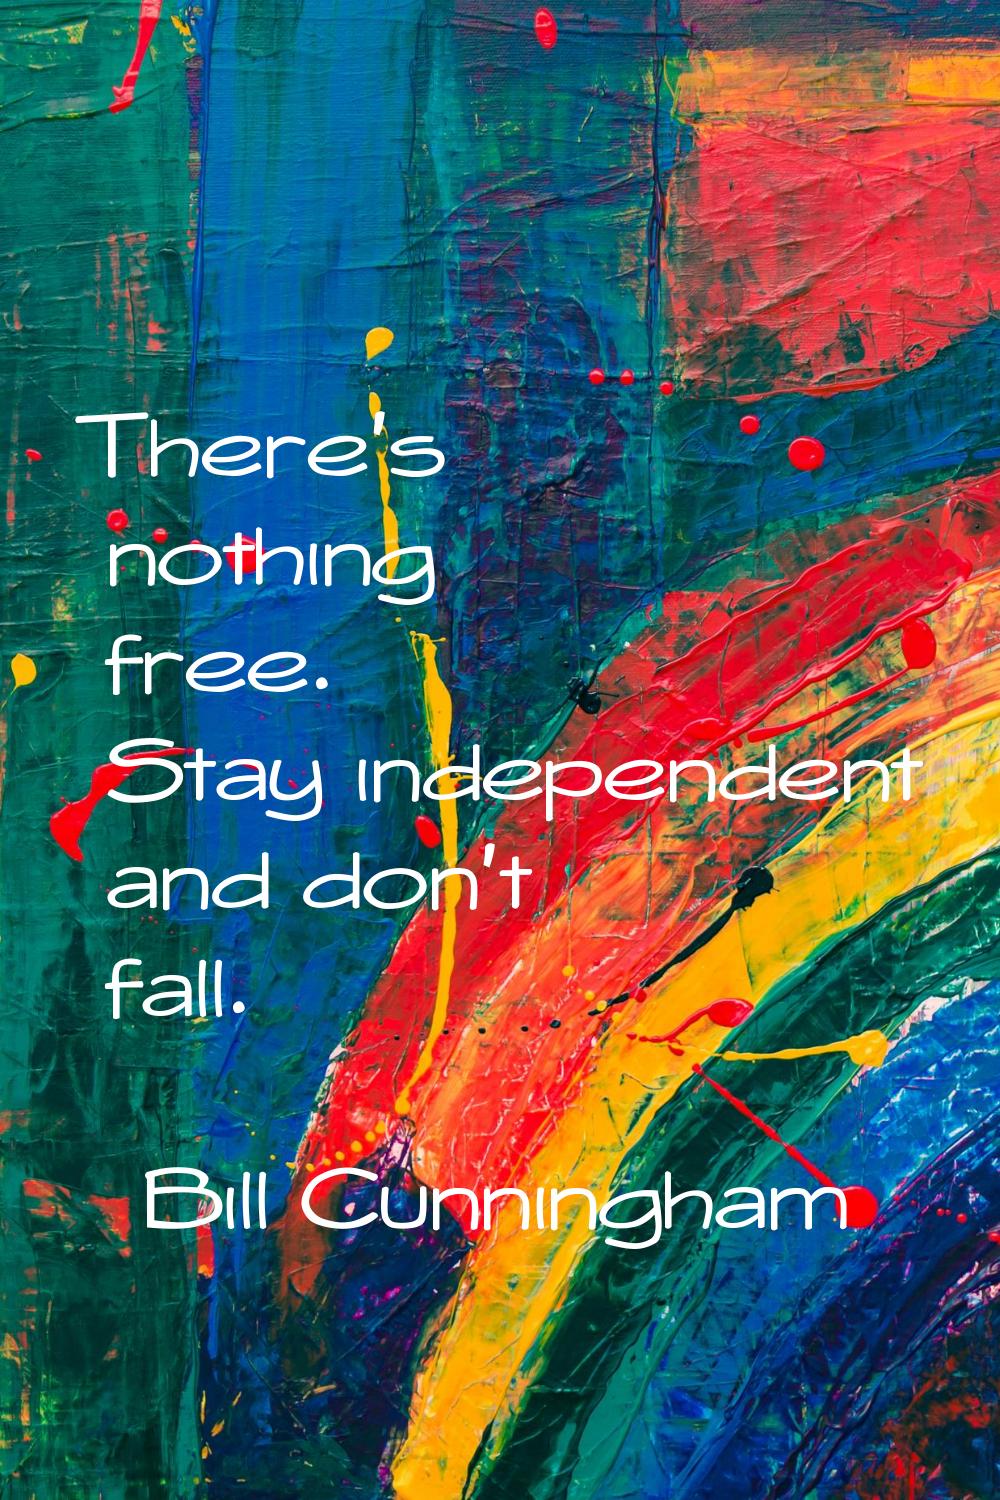 There's nothing free. Stay independent and don't fall.